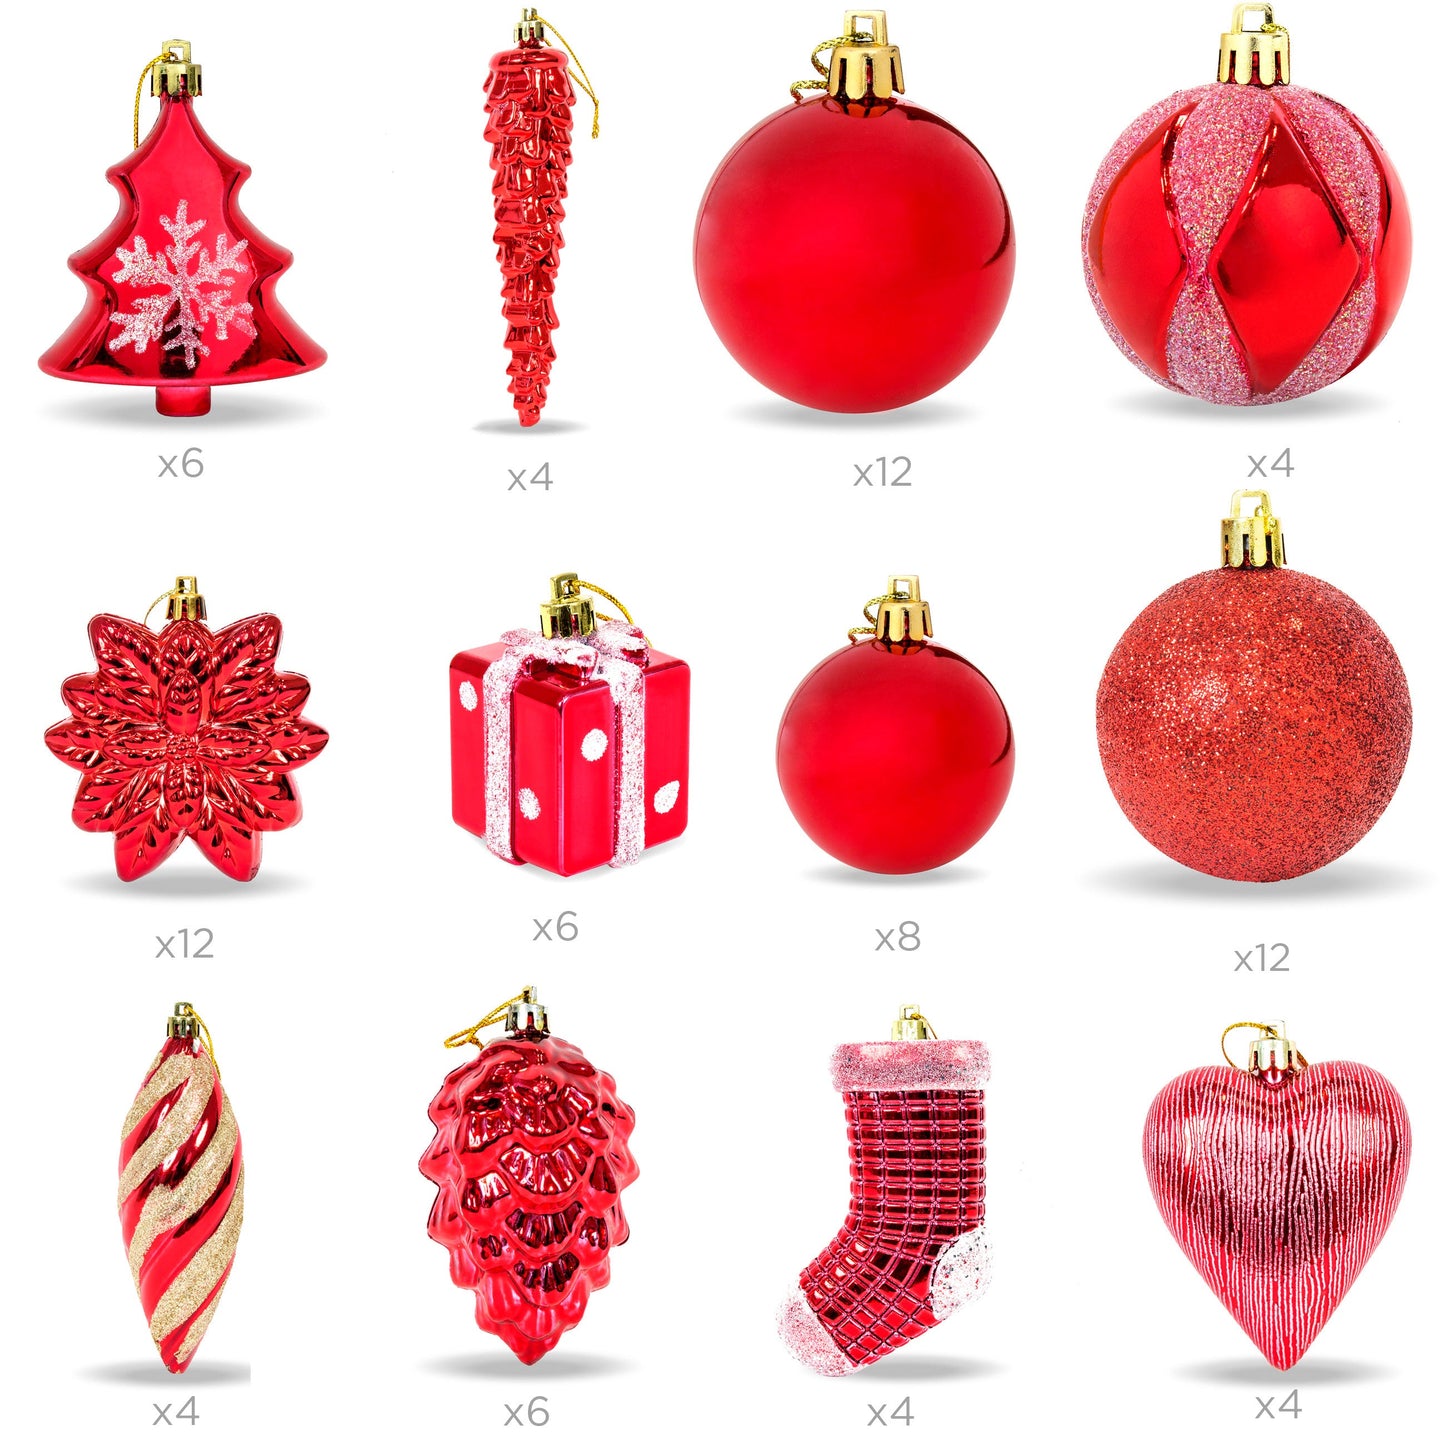 Set of 72 Handcrafted Shatterproof Christmas Ornament Holiday Decorations